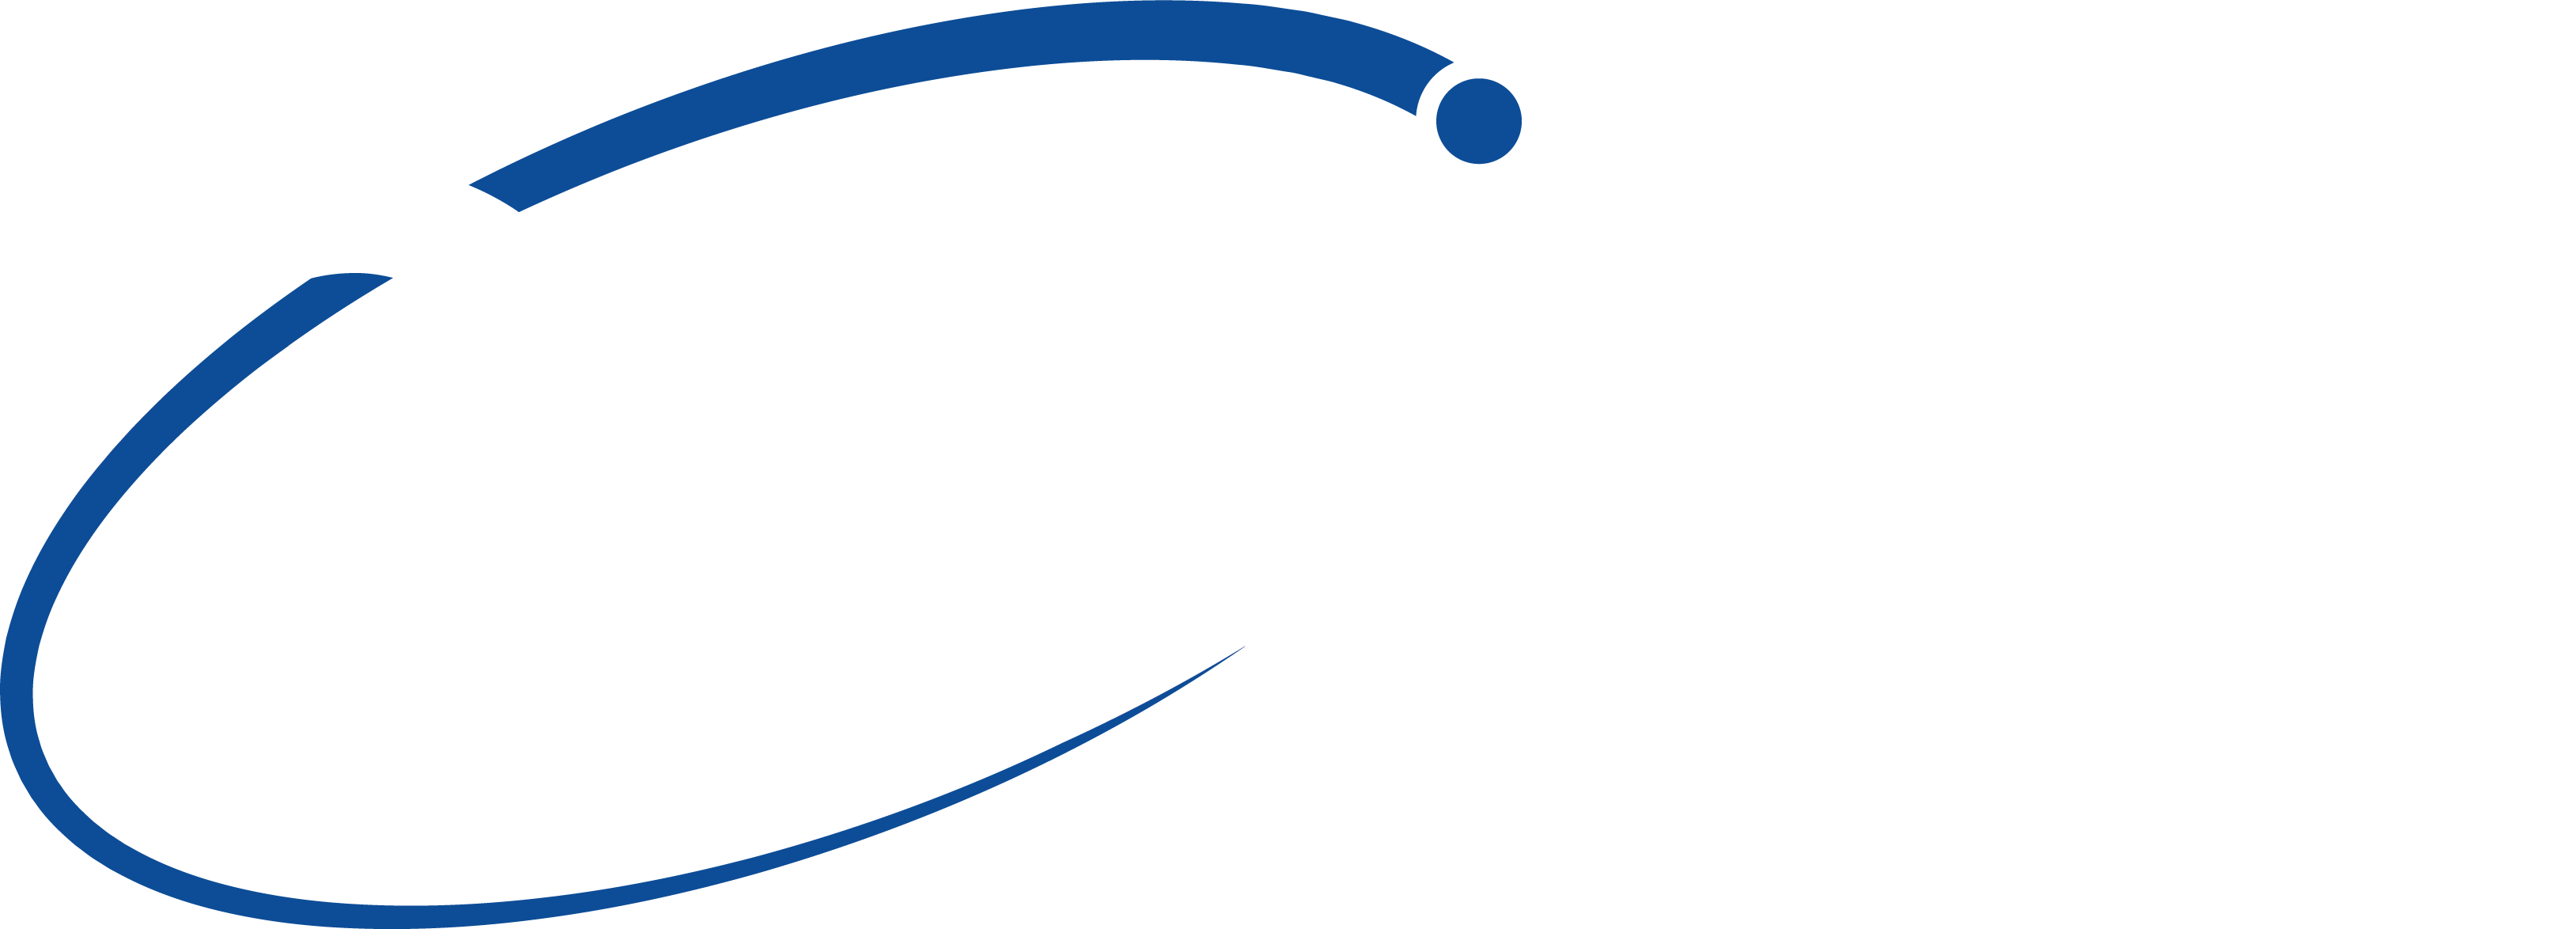 Plotly_Resources\CSSI-Logo_White_CMYK_w_words.png